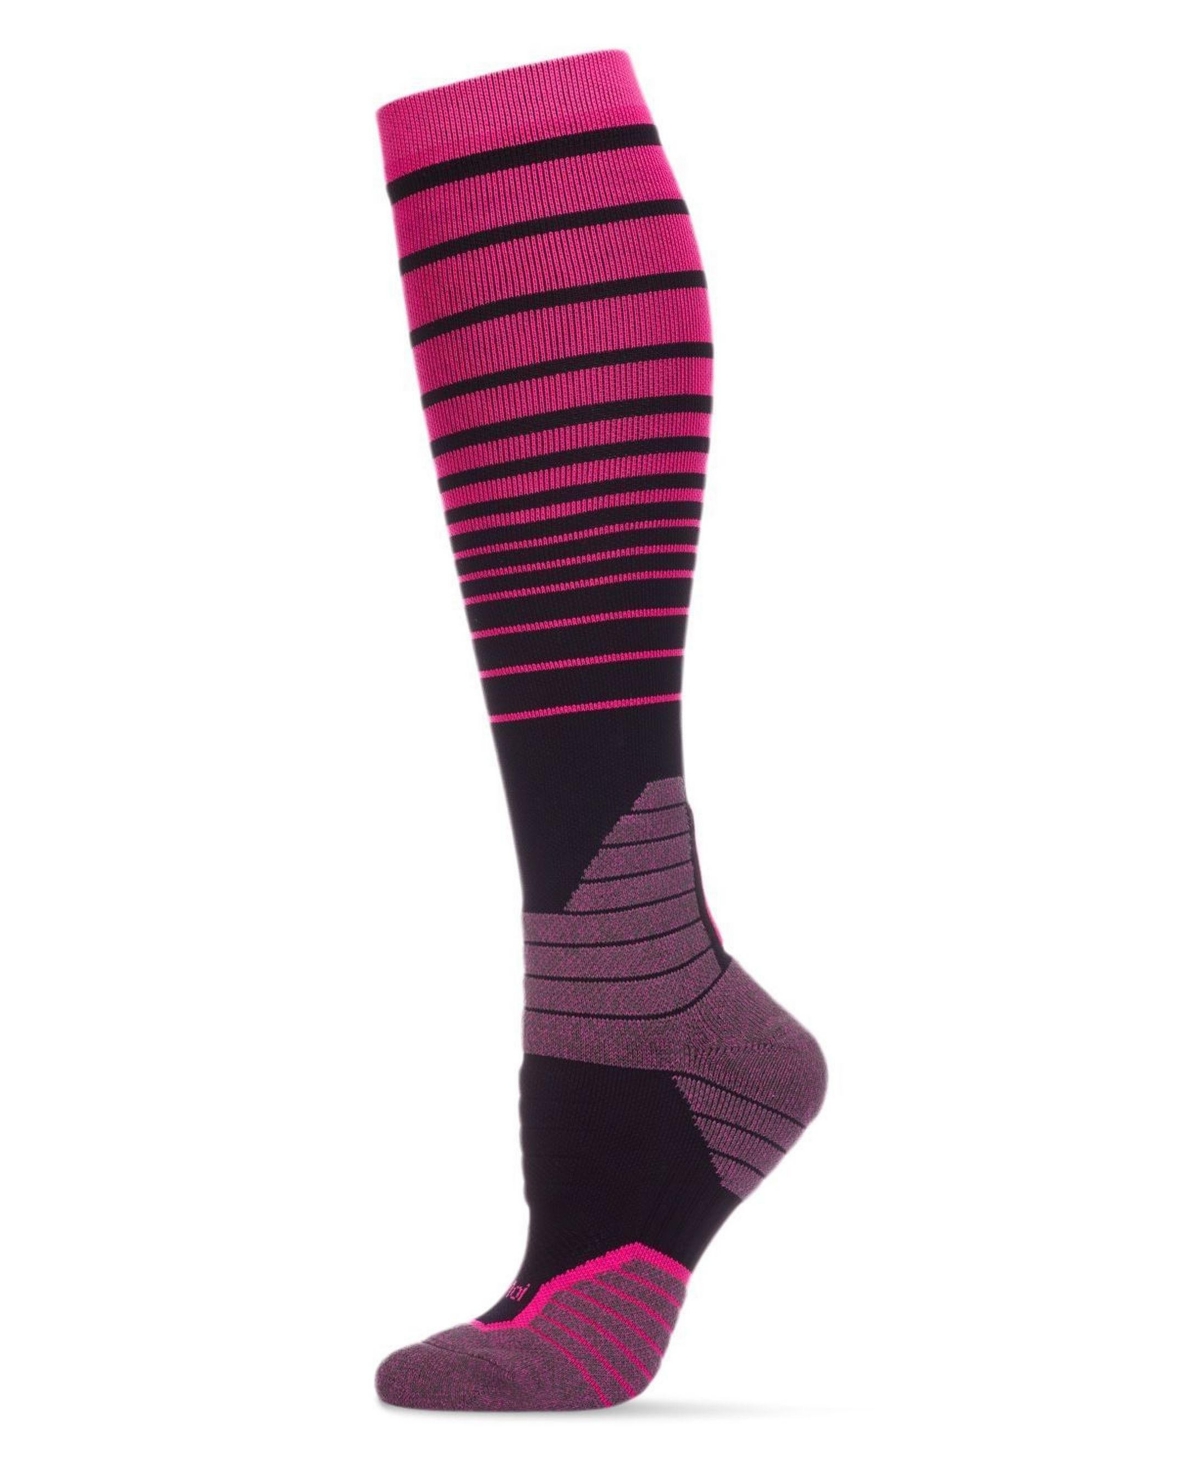 Women's Gradient Compression Socks - Electric Pink